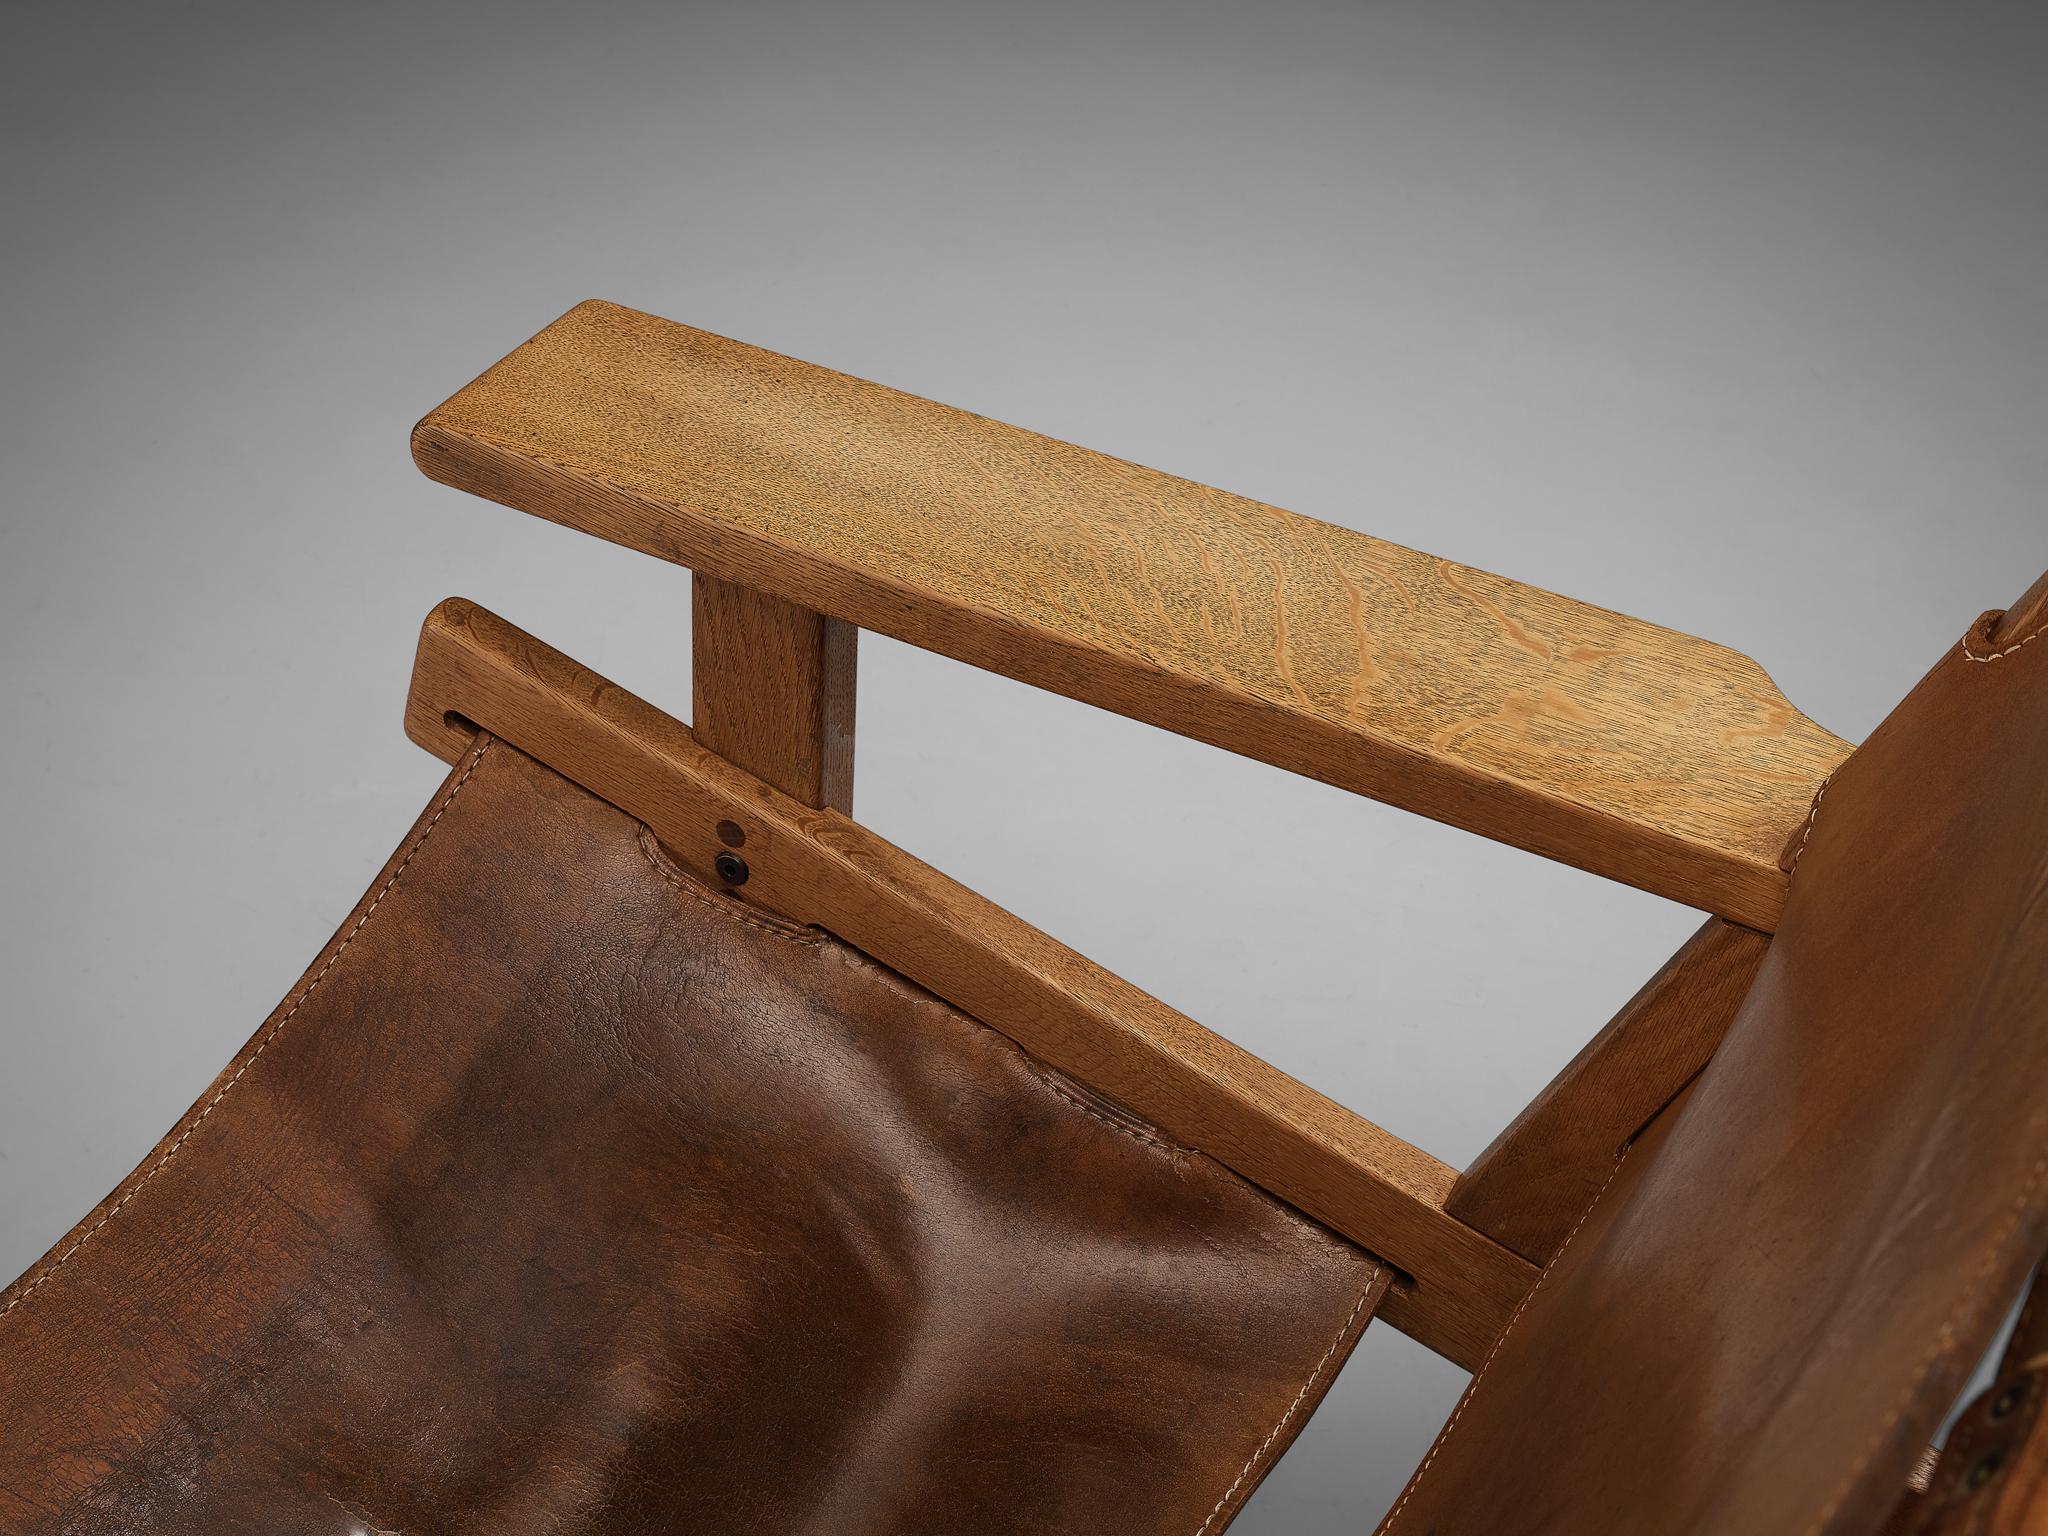  Kurt Østervig 'Hunting' Lounge Chair in Cognac Leather and Oak  For Sale 2